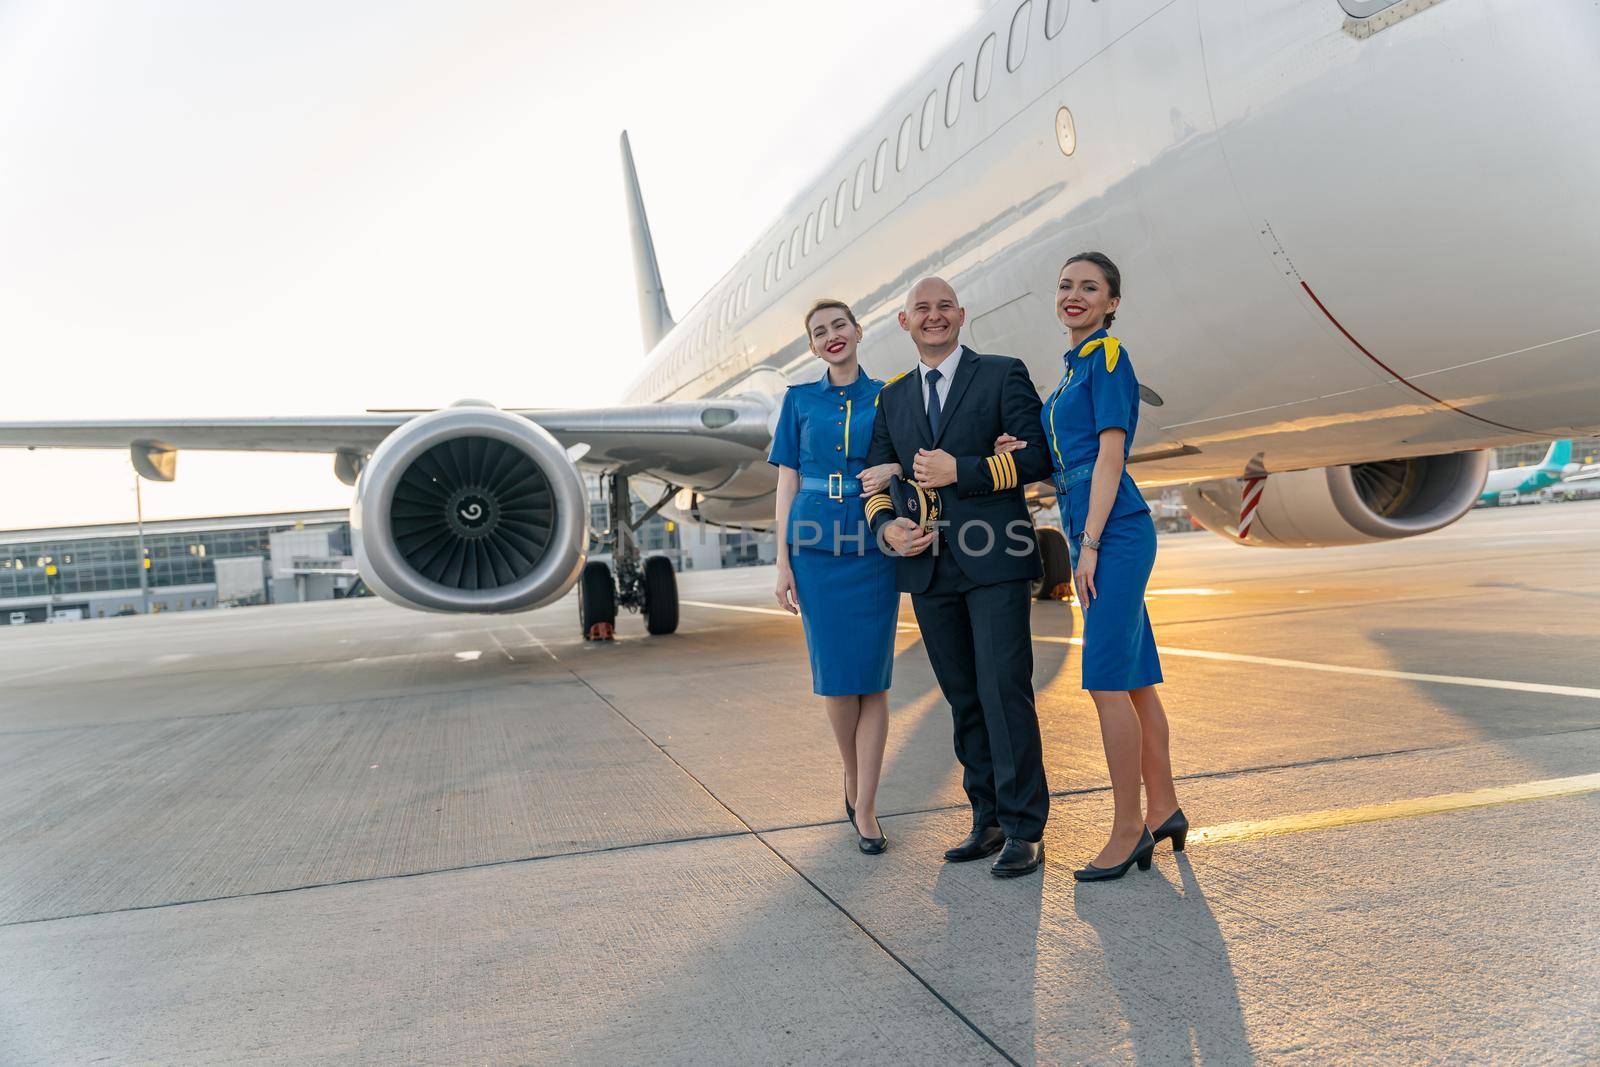 Smiling male pilot in uniform posing together with two air stewardesses near airplane outdoor